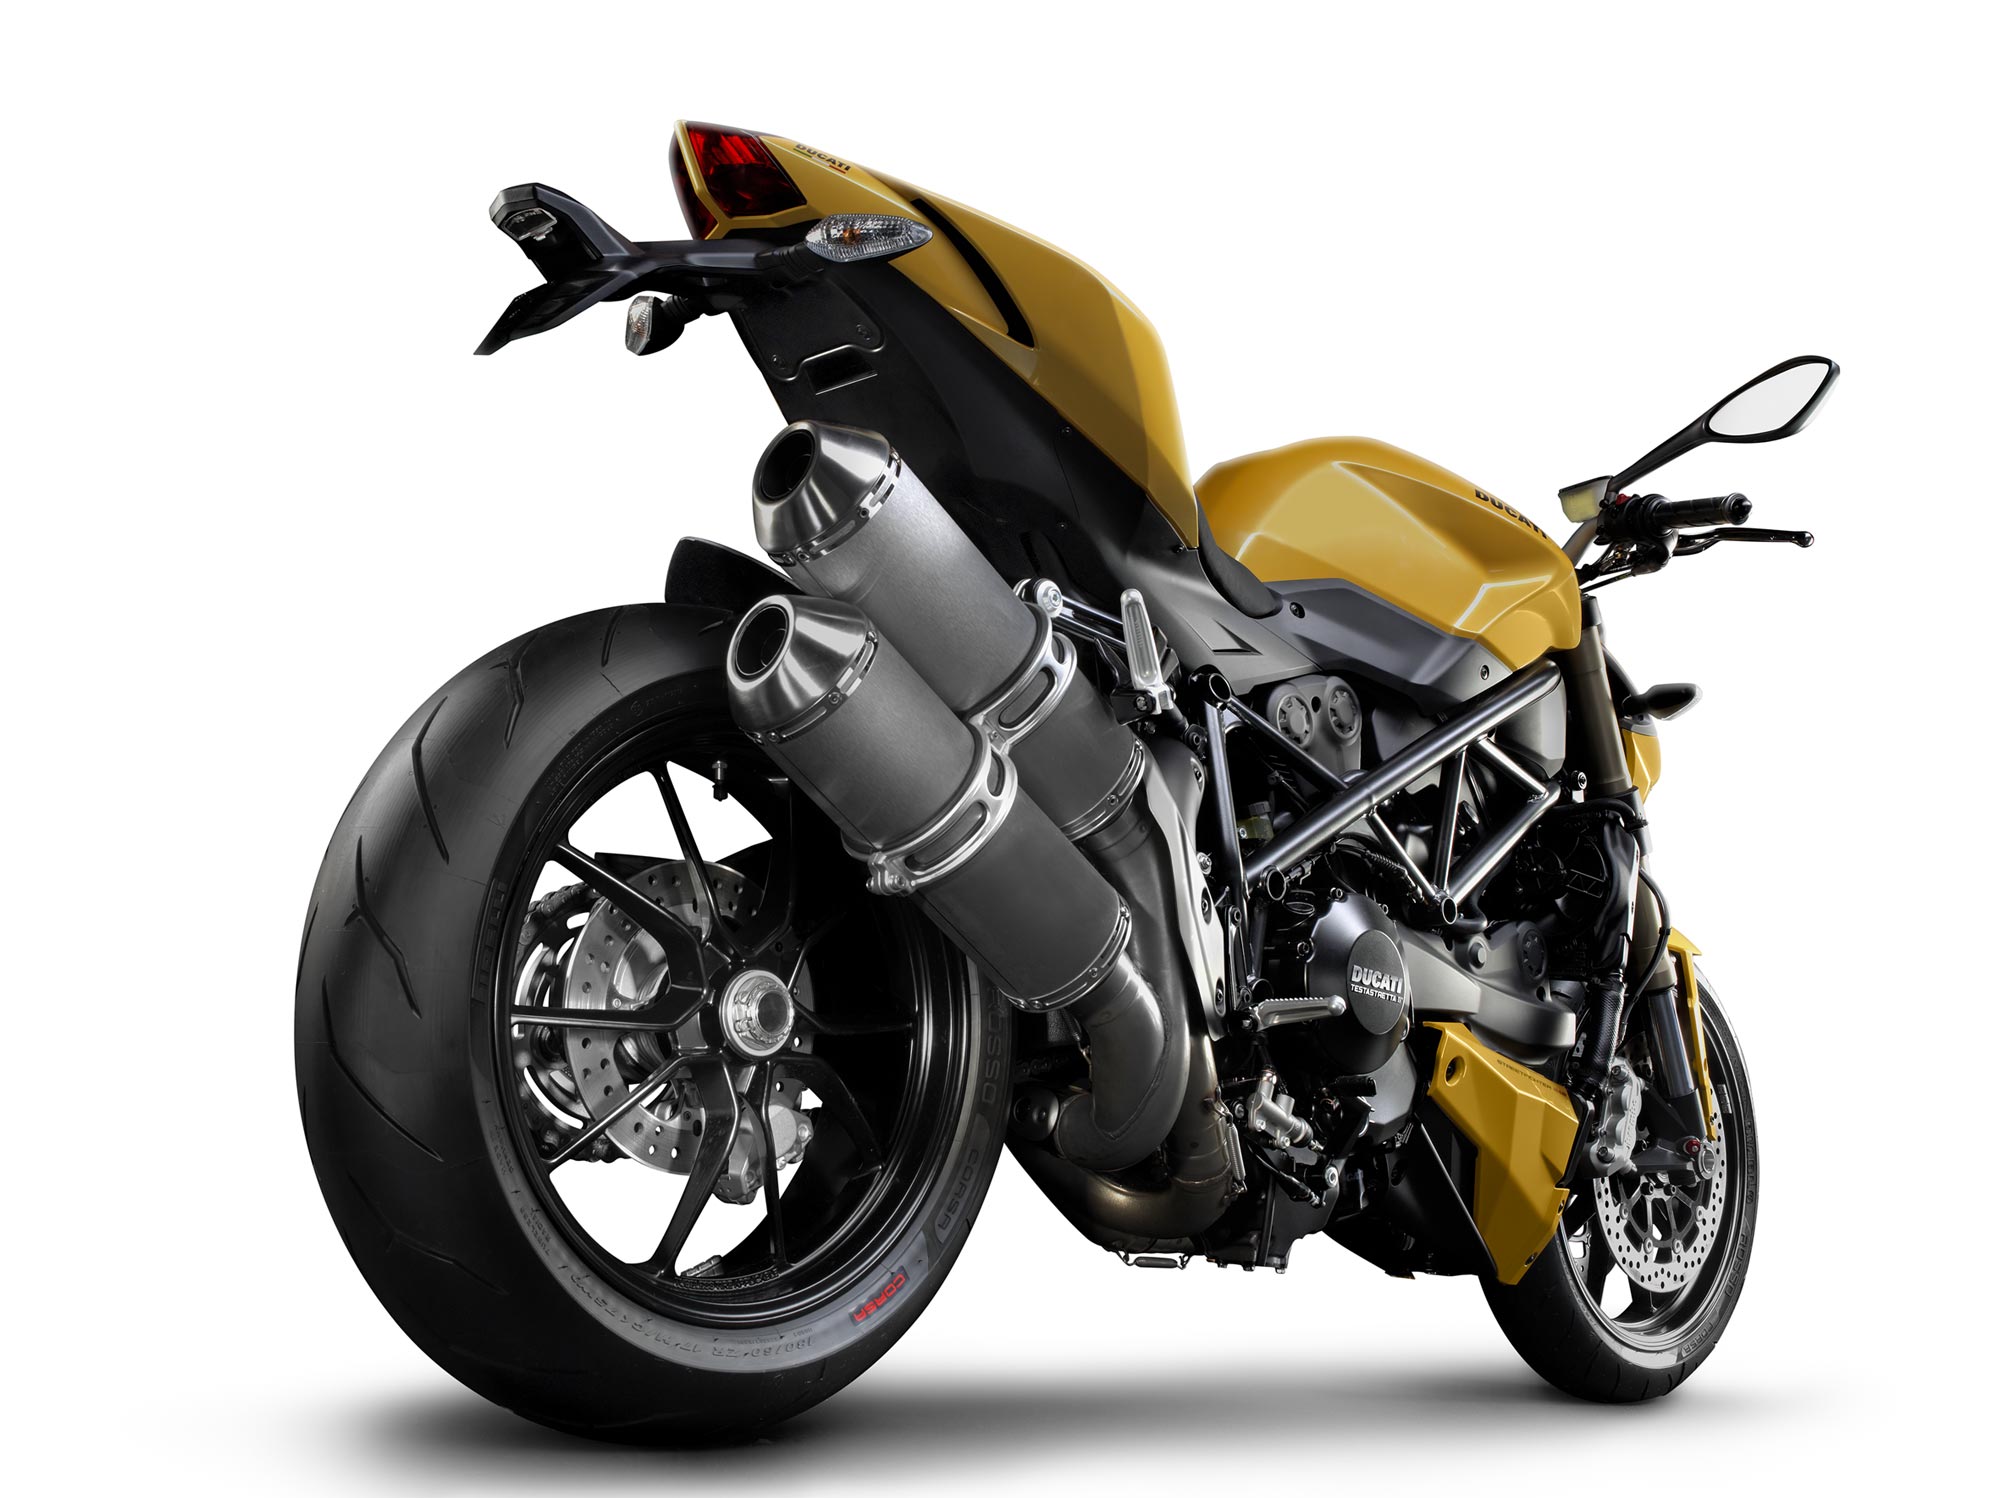 Ducati Streetfighter 848 Wallpapers